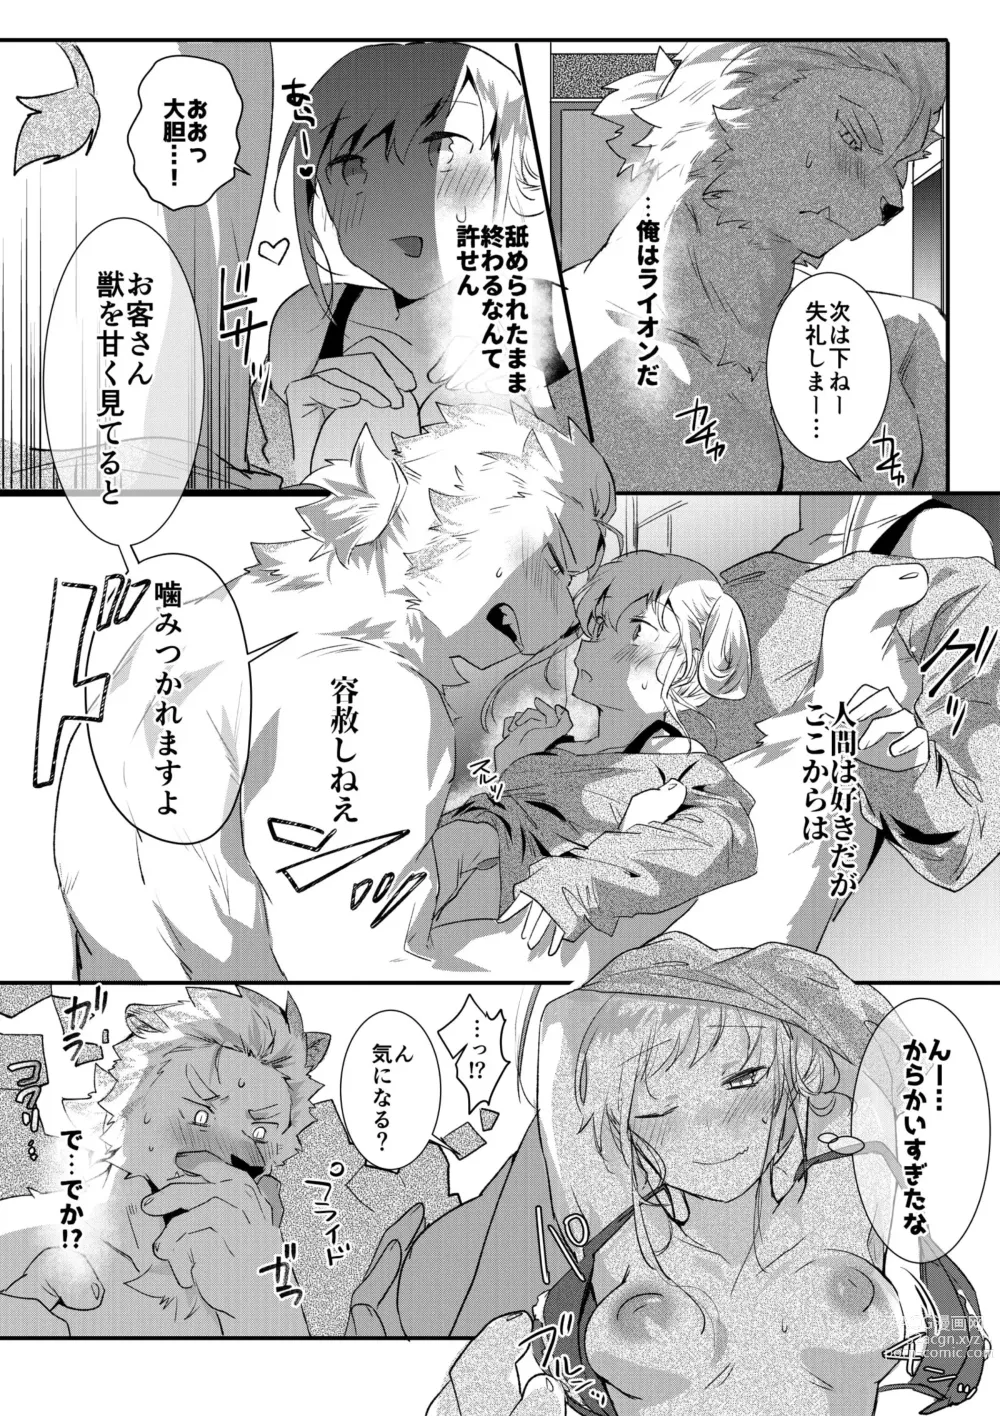 Page 7 of doujinshi Rental Lion to LoveHo